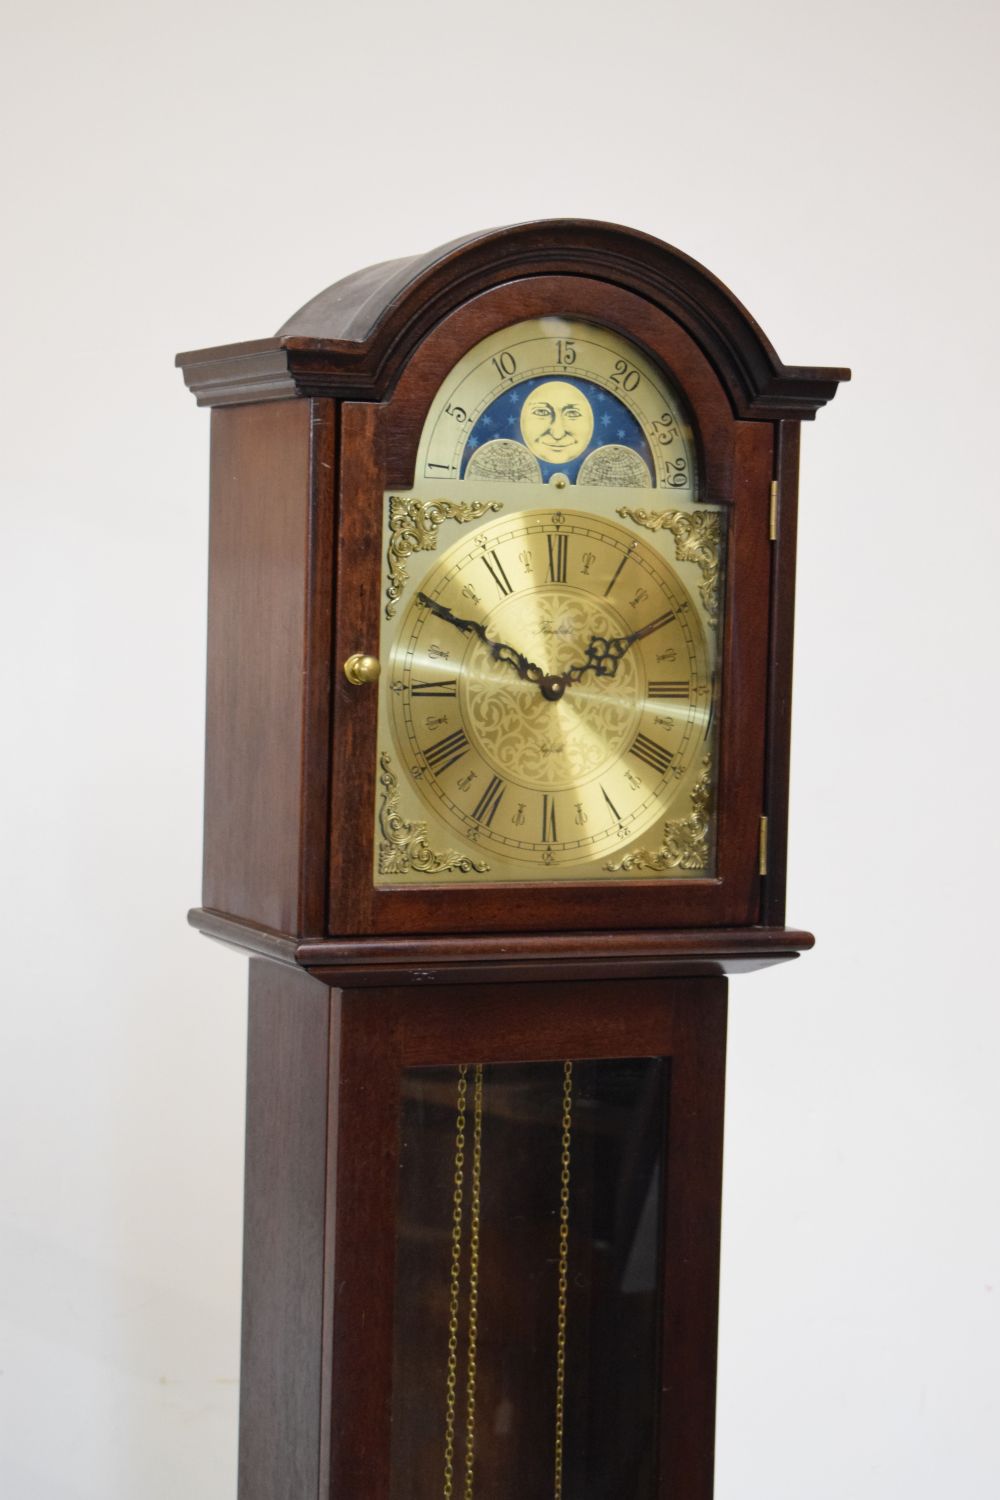 Reproduction mahogany cased chiming grandmother clock by Fenclocks, Suffolk, 179.5cm high - Image 2 of 6